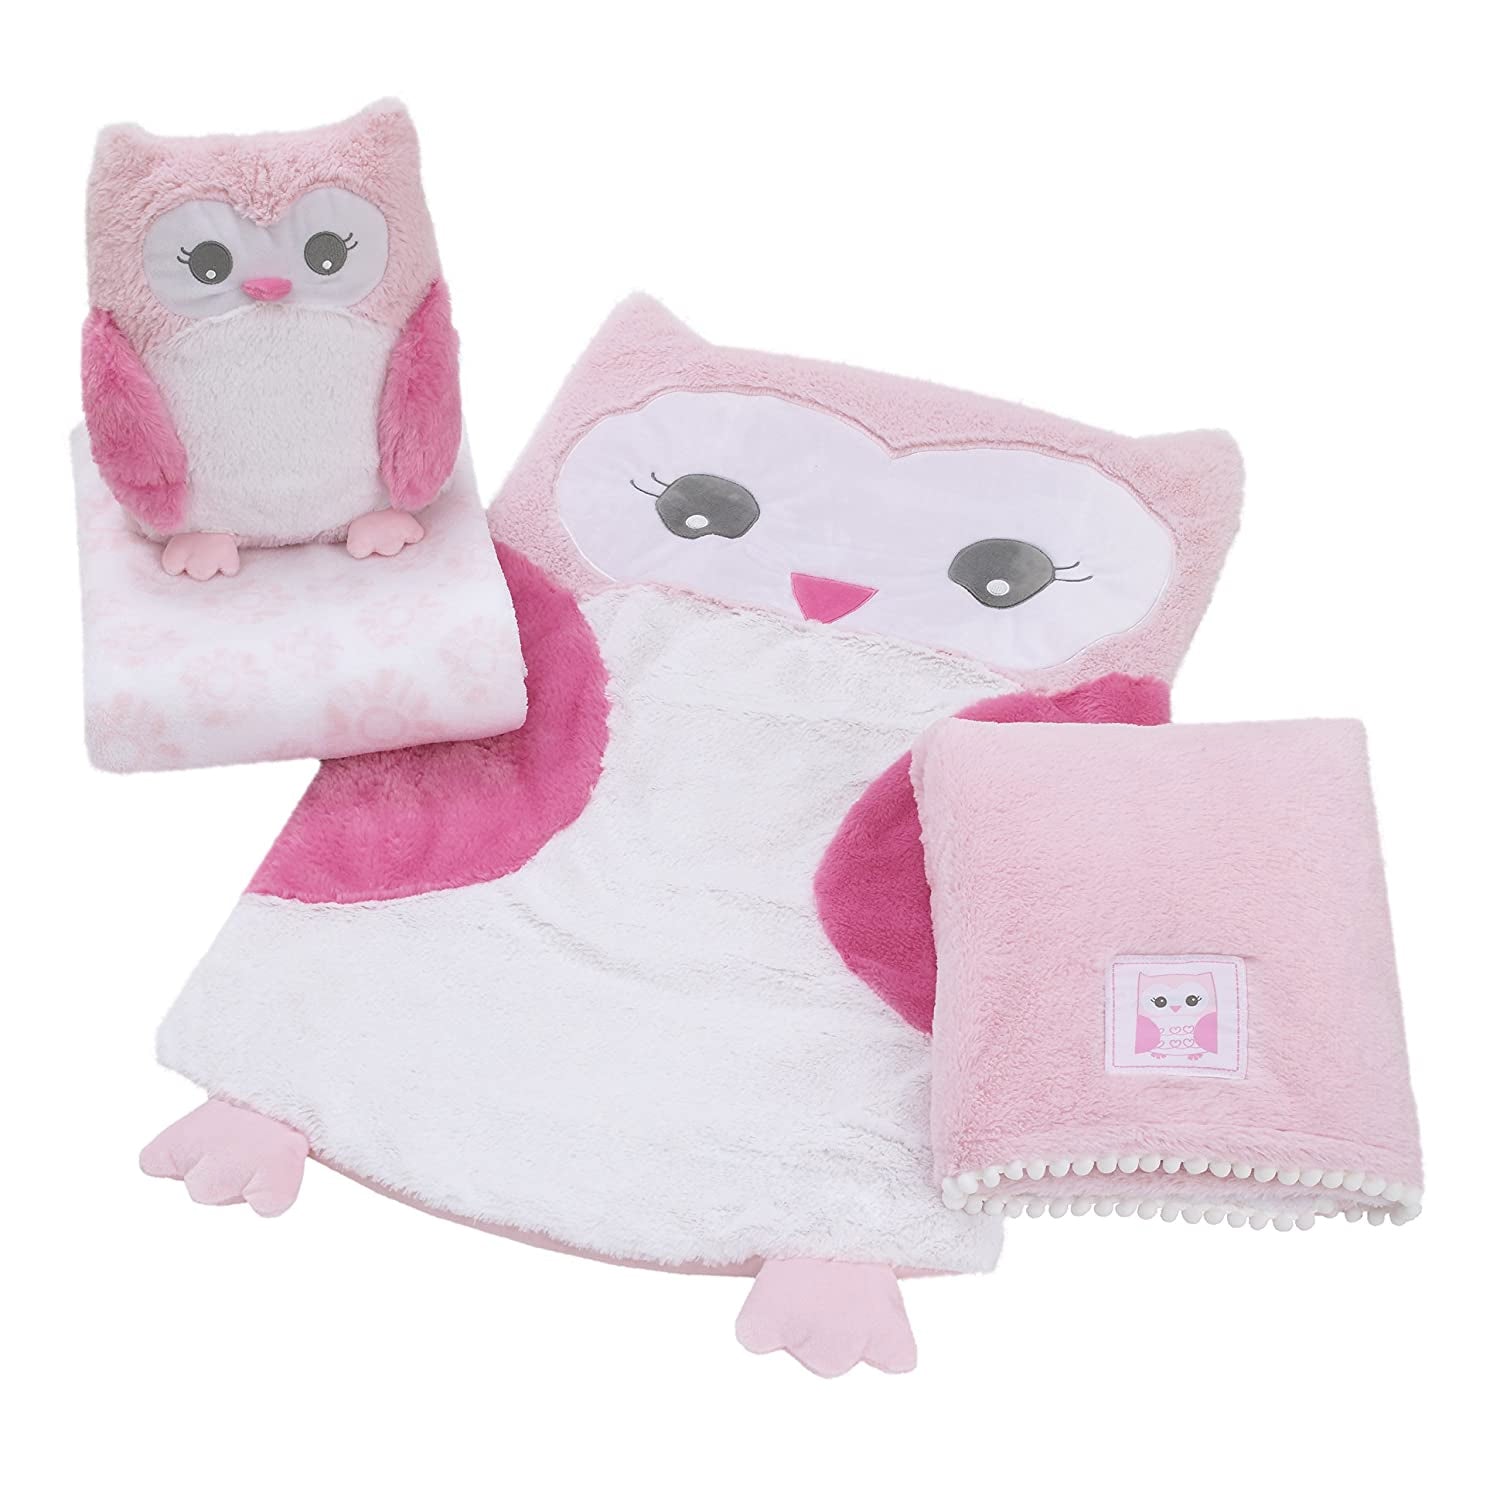 Nojo Super Soft Tummy Play Time Mat, Owl